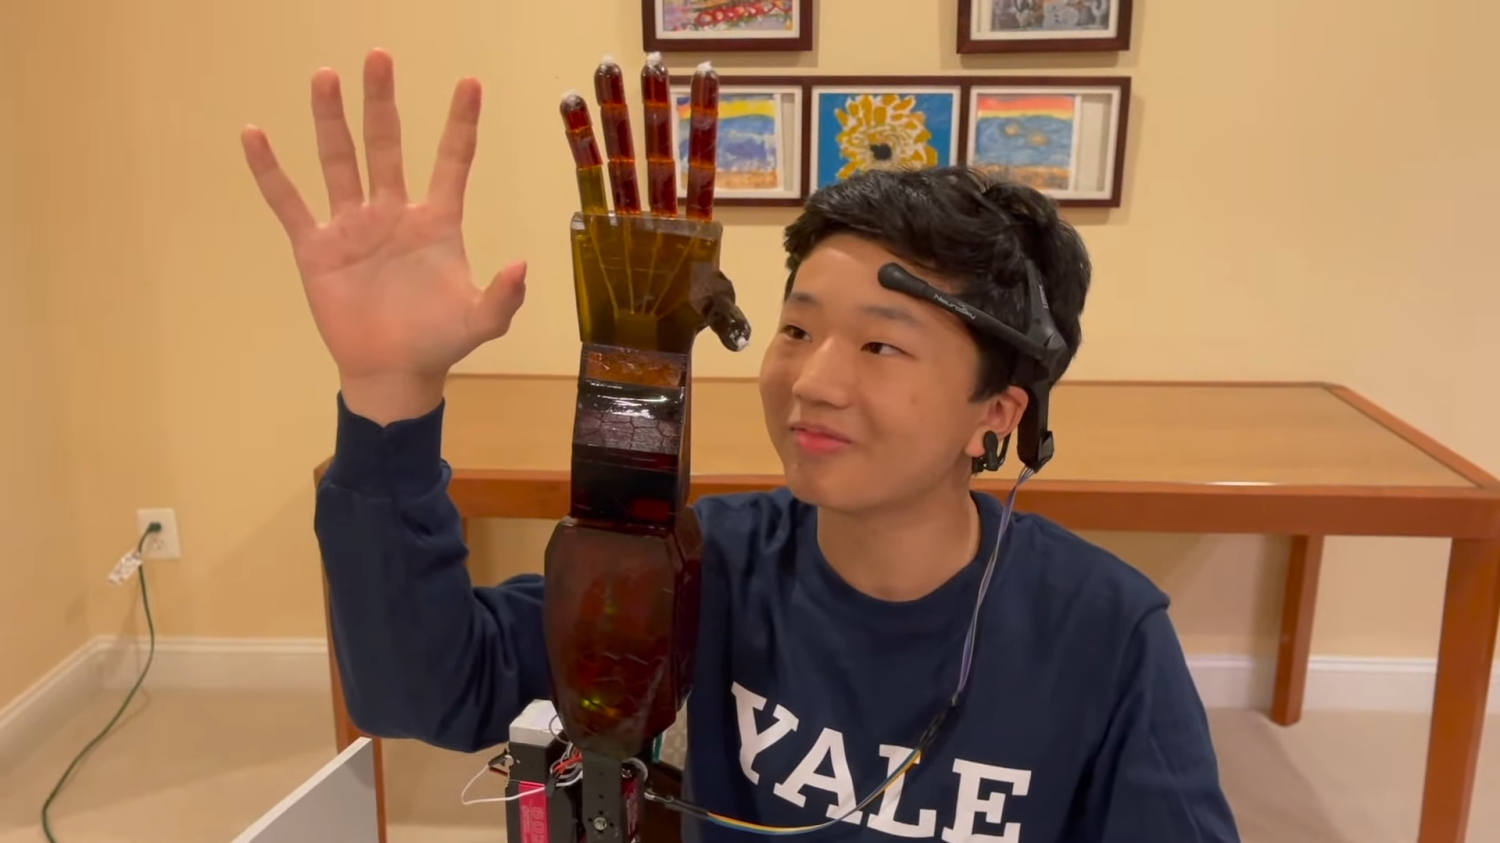 This mind-controlled prosthetic arm was built by a high school student